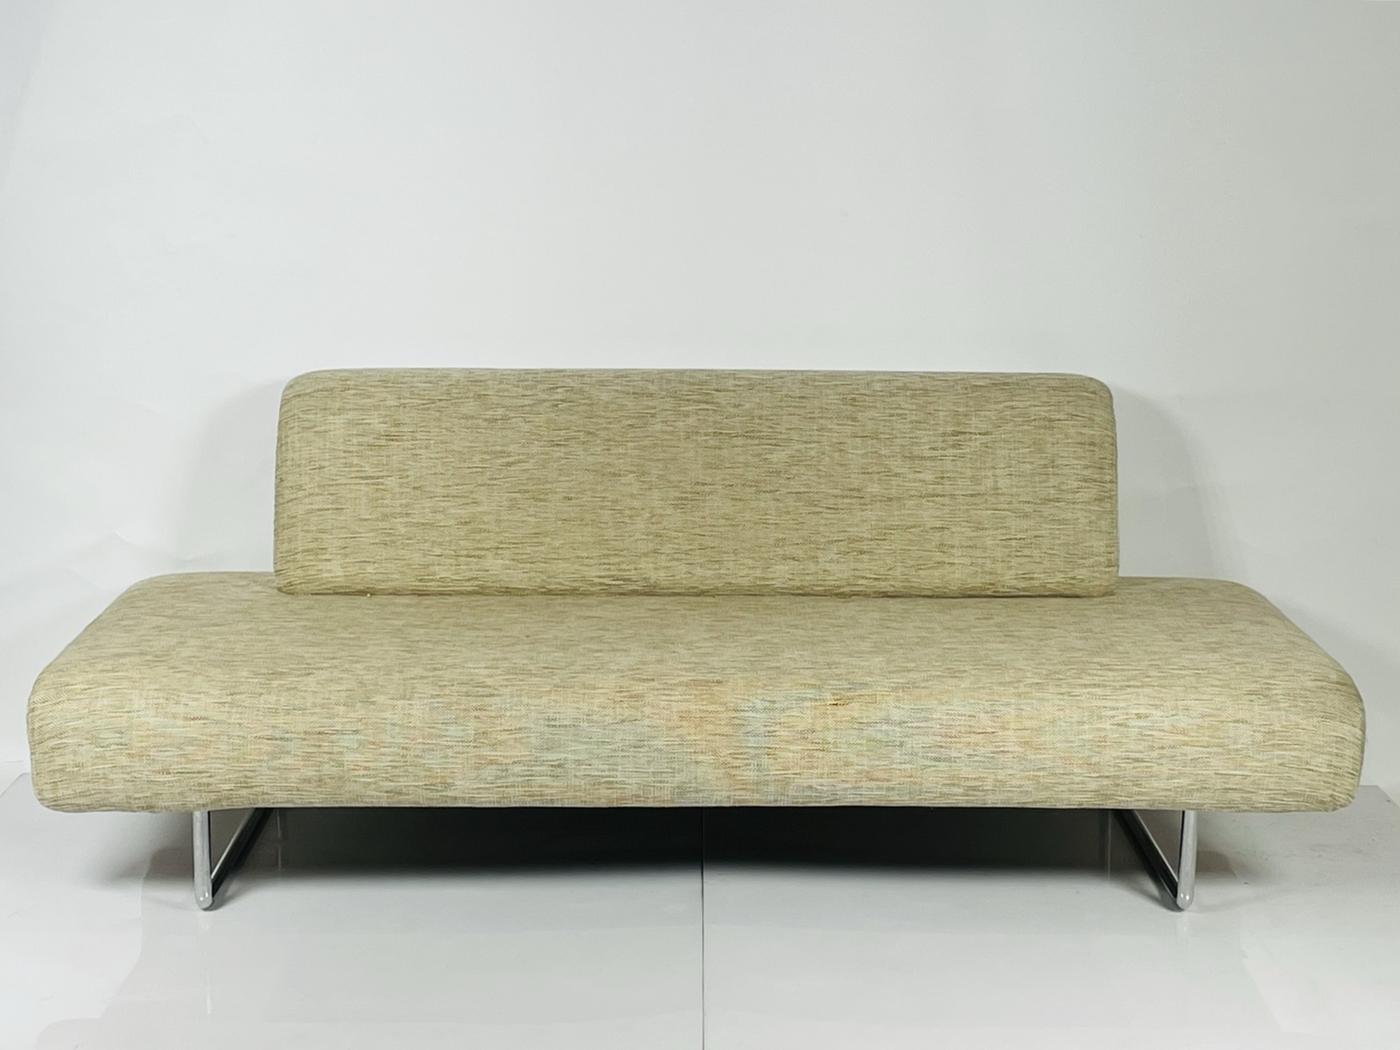 Introducing the Cloud Sofa by Naoto Fukasawa for B&B Italia - a stunning piece of furniture that will transform any living space into a cozy and comfortable haven. This beautiful couch features a timeless design with a back cushion and sleek metal